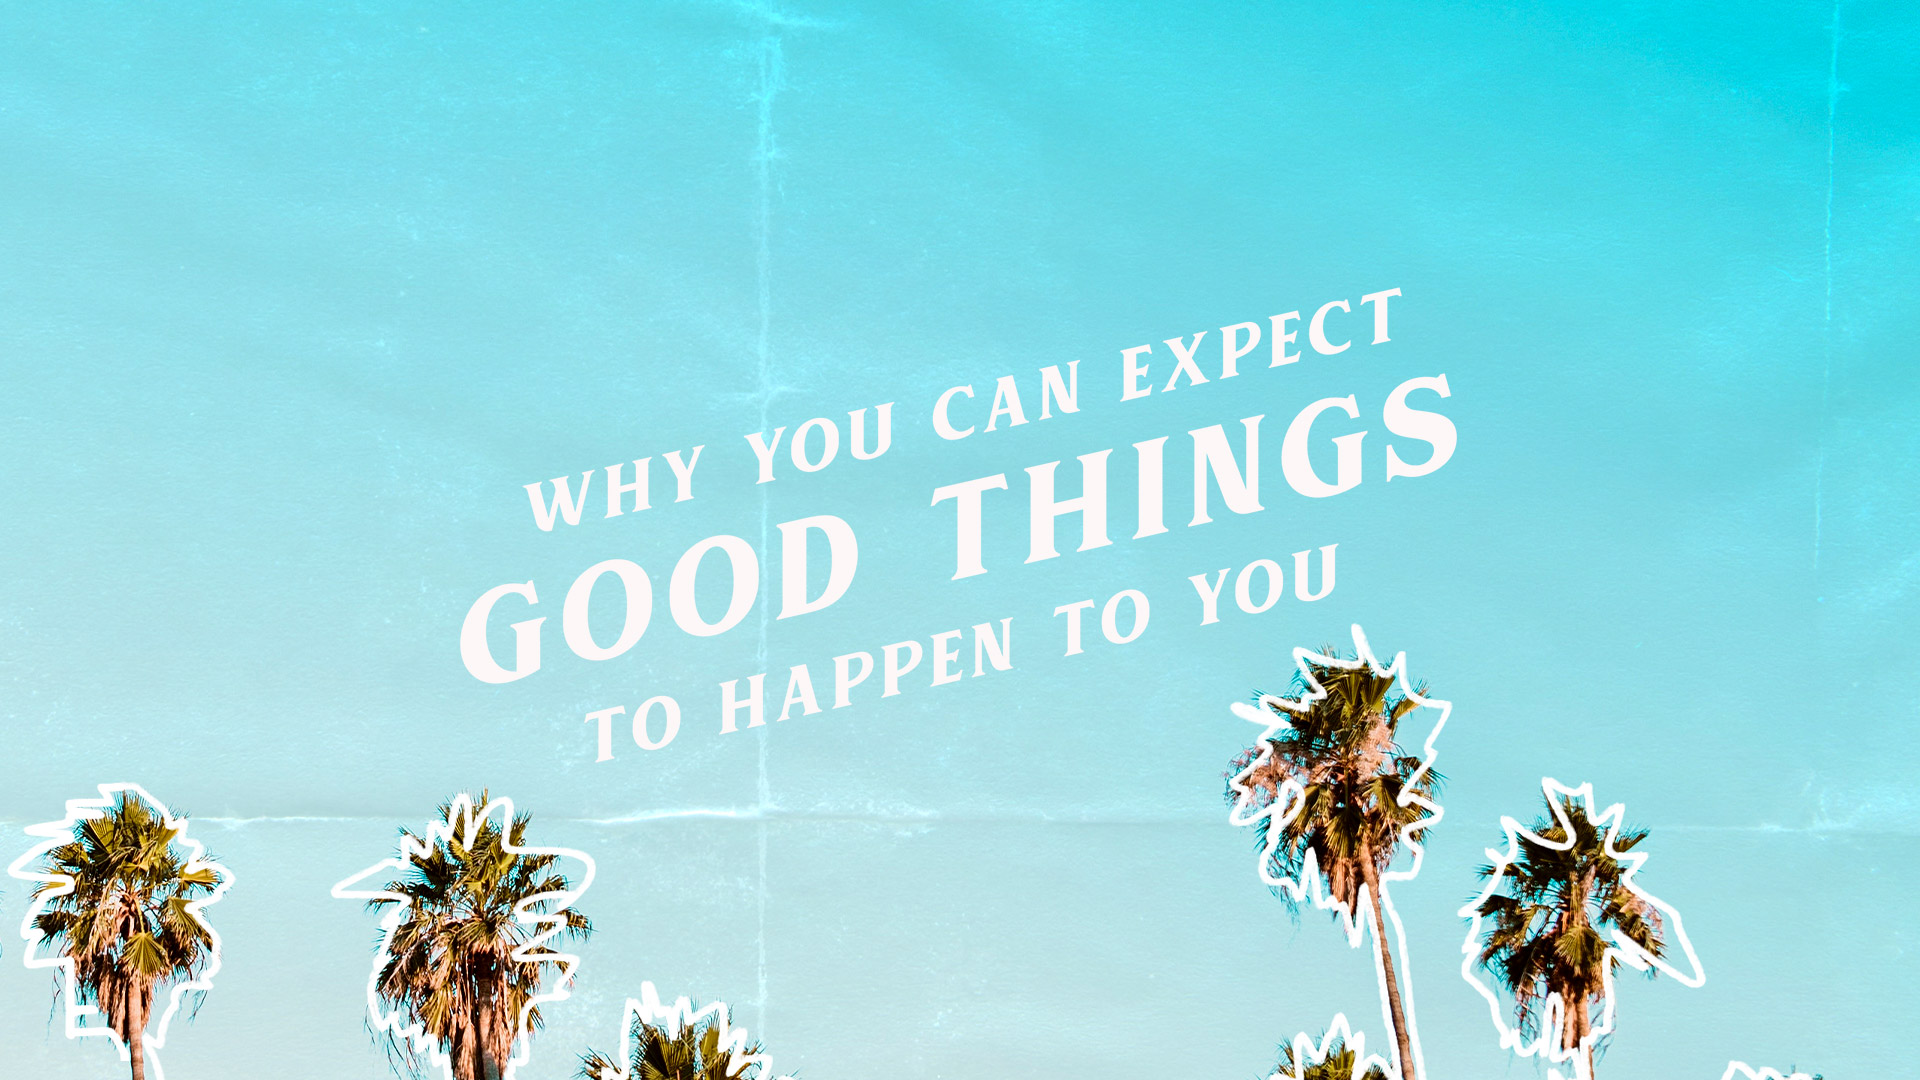 Good Things Happened Today by Christopher Atwood